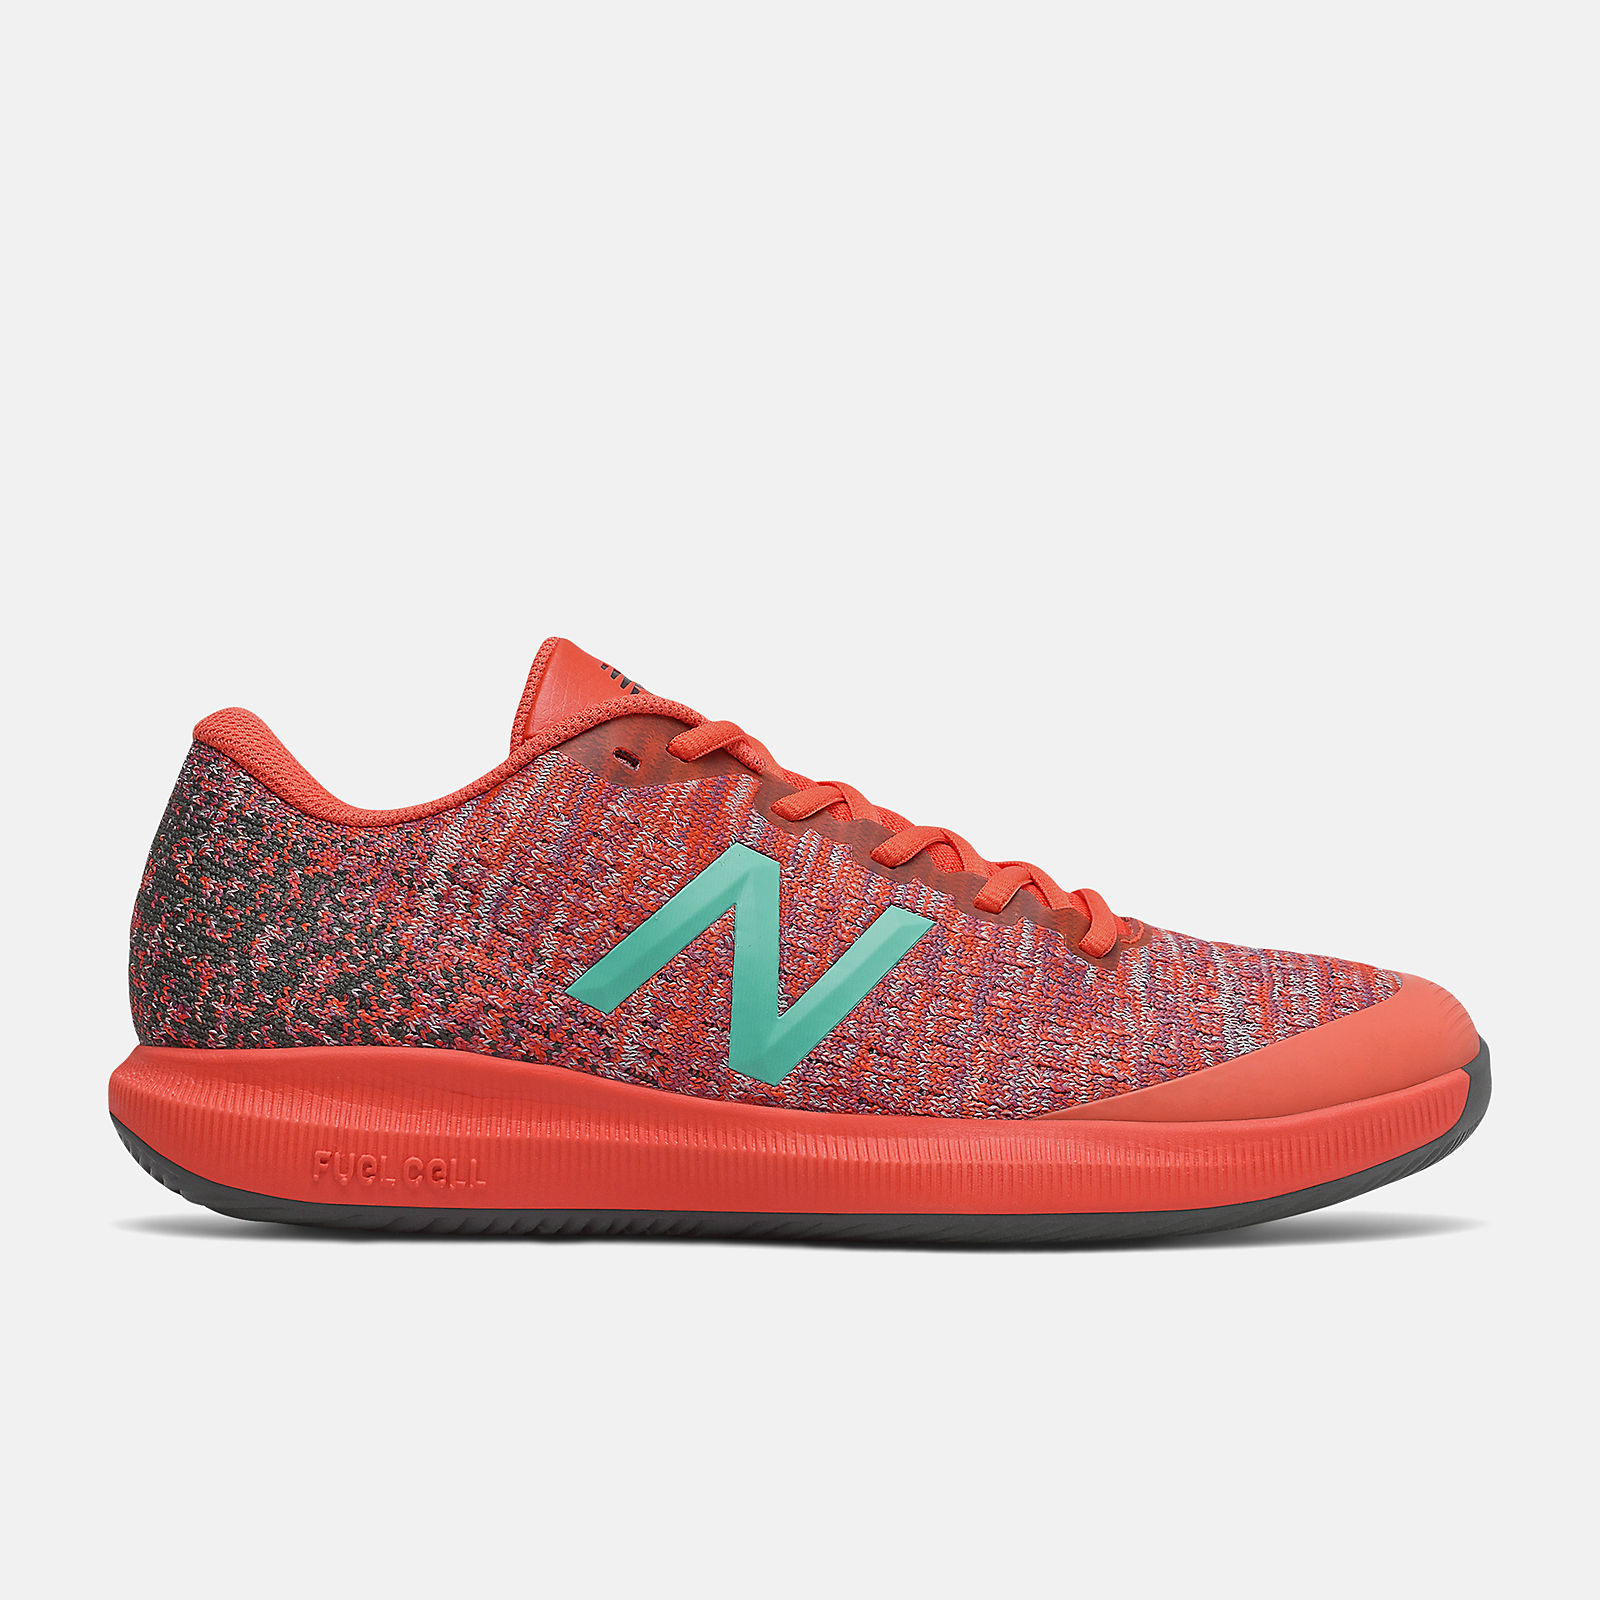 FuelCell 996v4 - New Balance